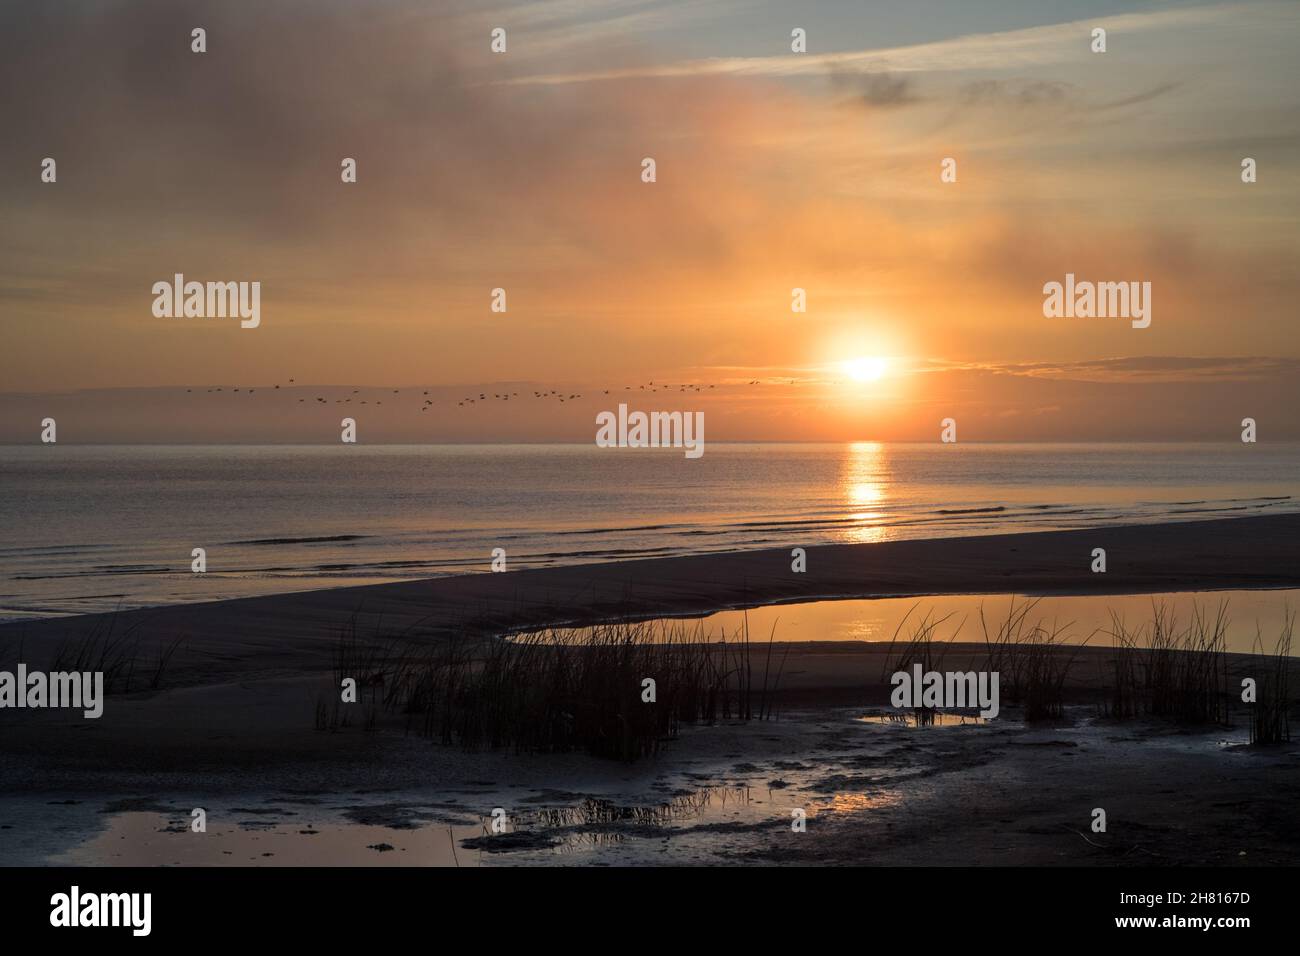 A sunrise scene on the Baltic sea beach with rising sun and a flock of birds flying by in the distance Stock Photo